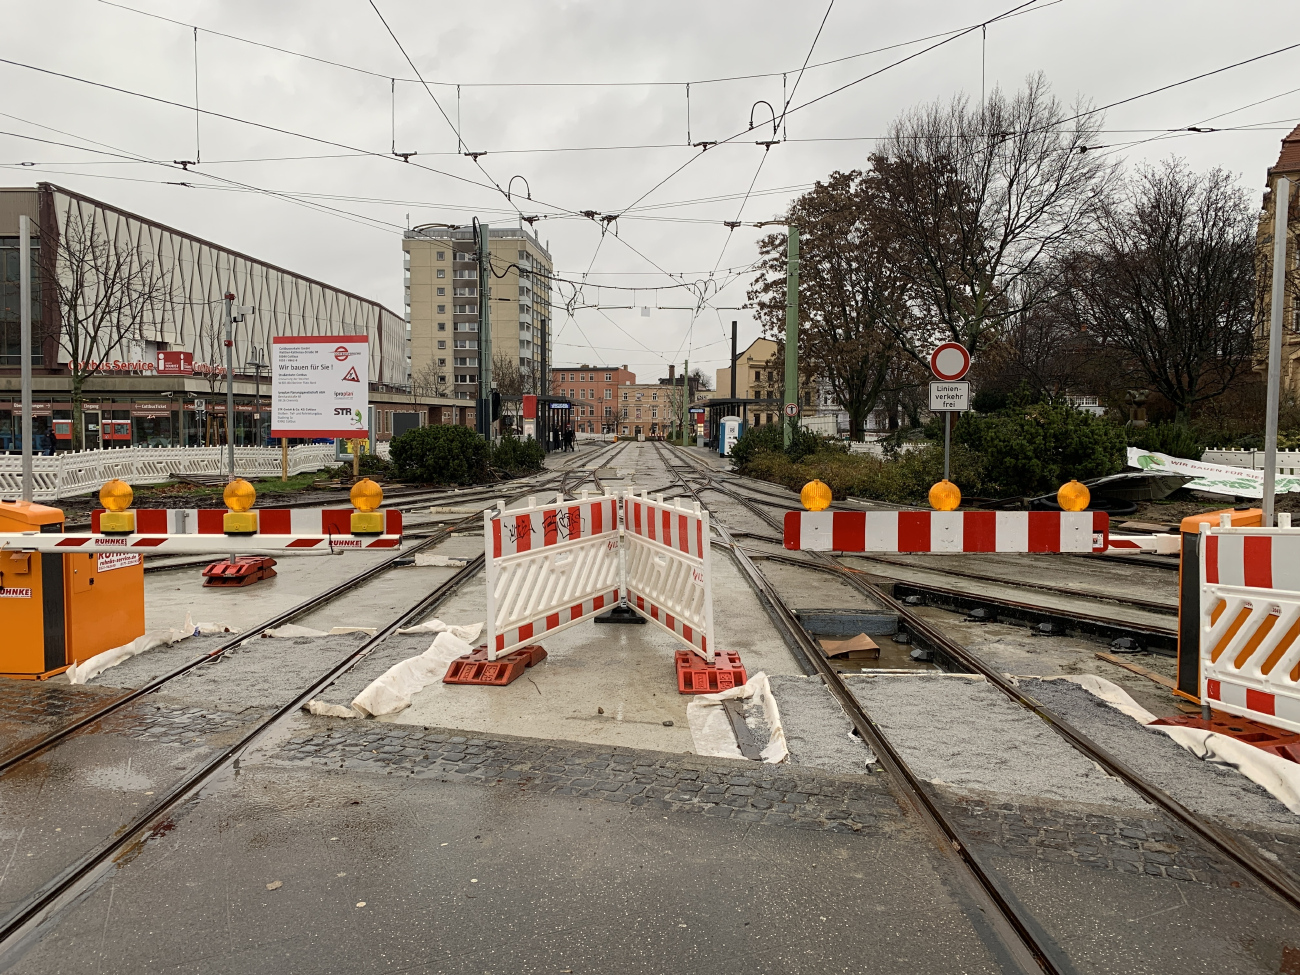 Cottbus — Tram lines and infrastructure